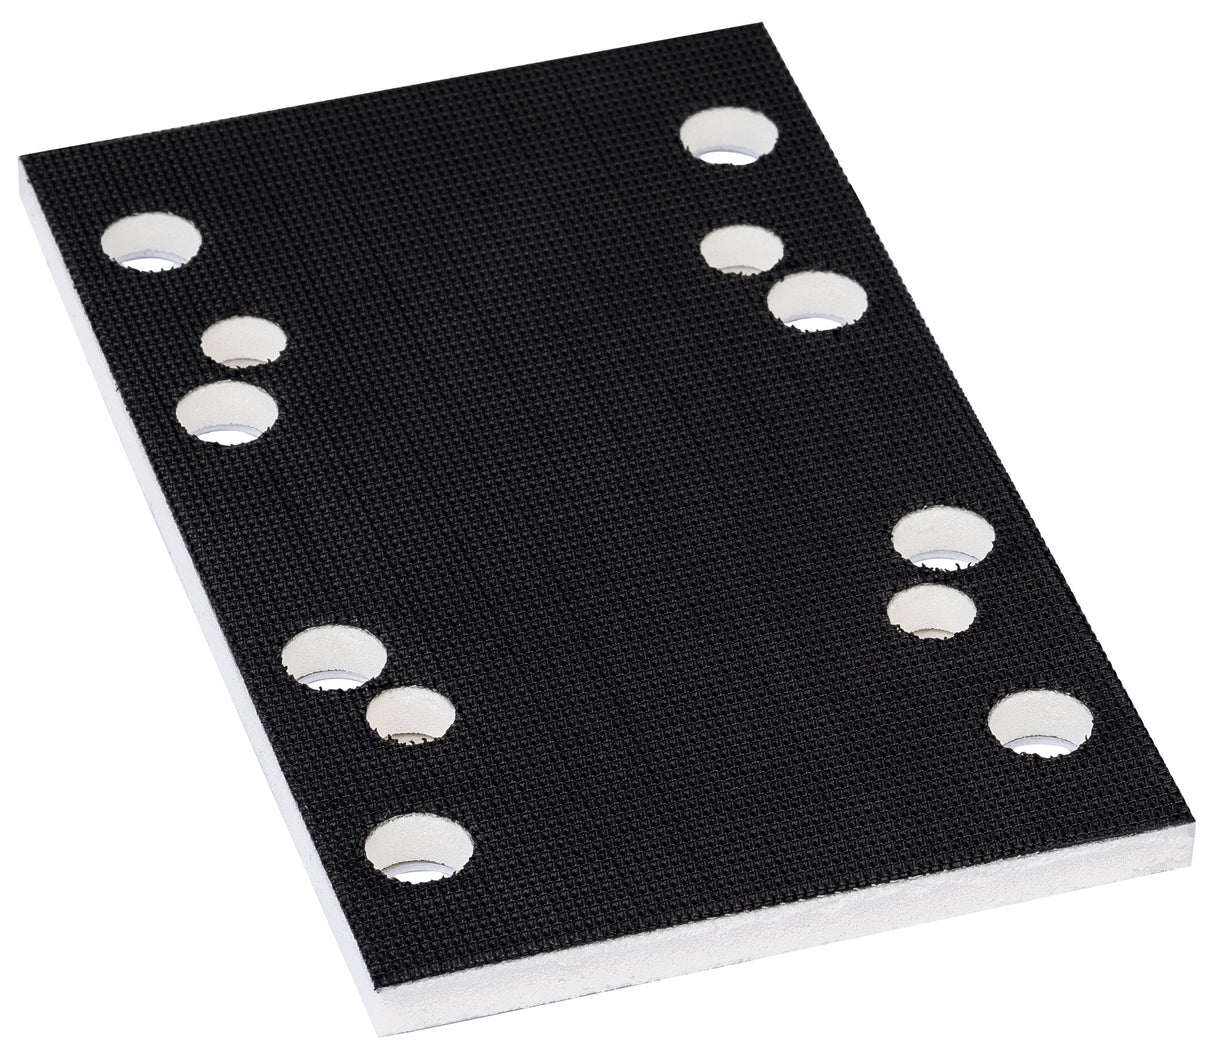 Bosch Professional Sanding Plate - 80 x 130 mm with Velcro-Type Fastening